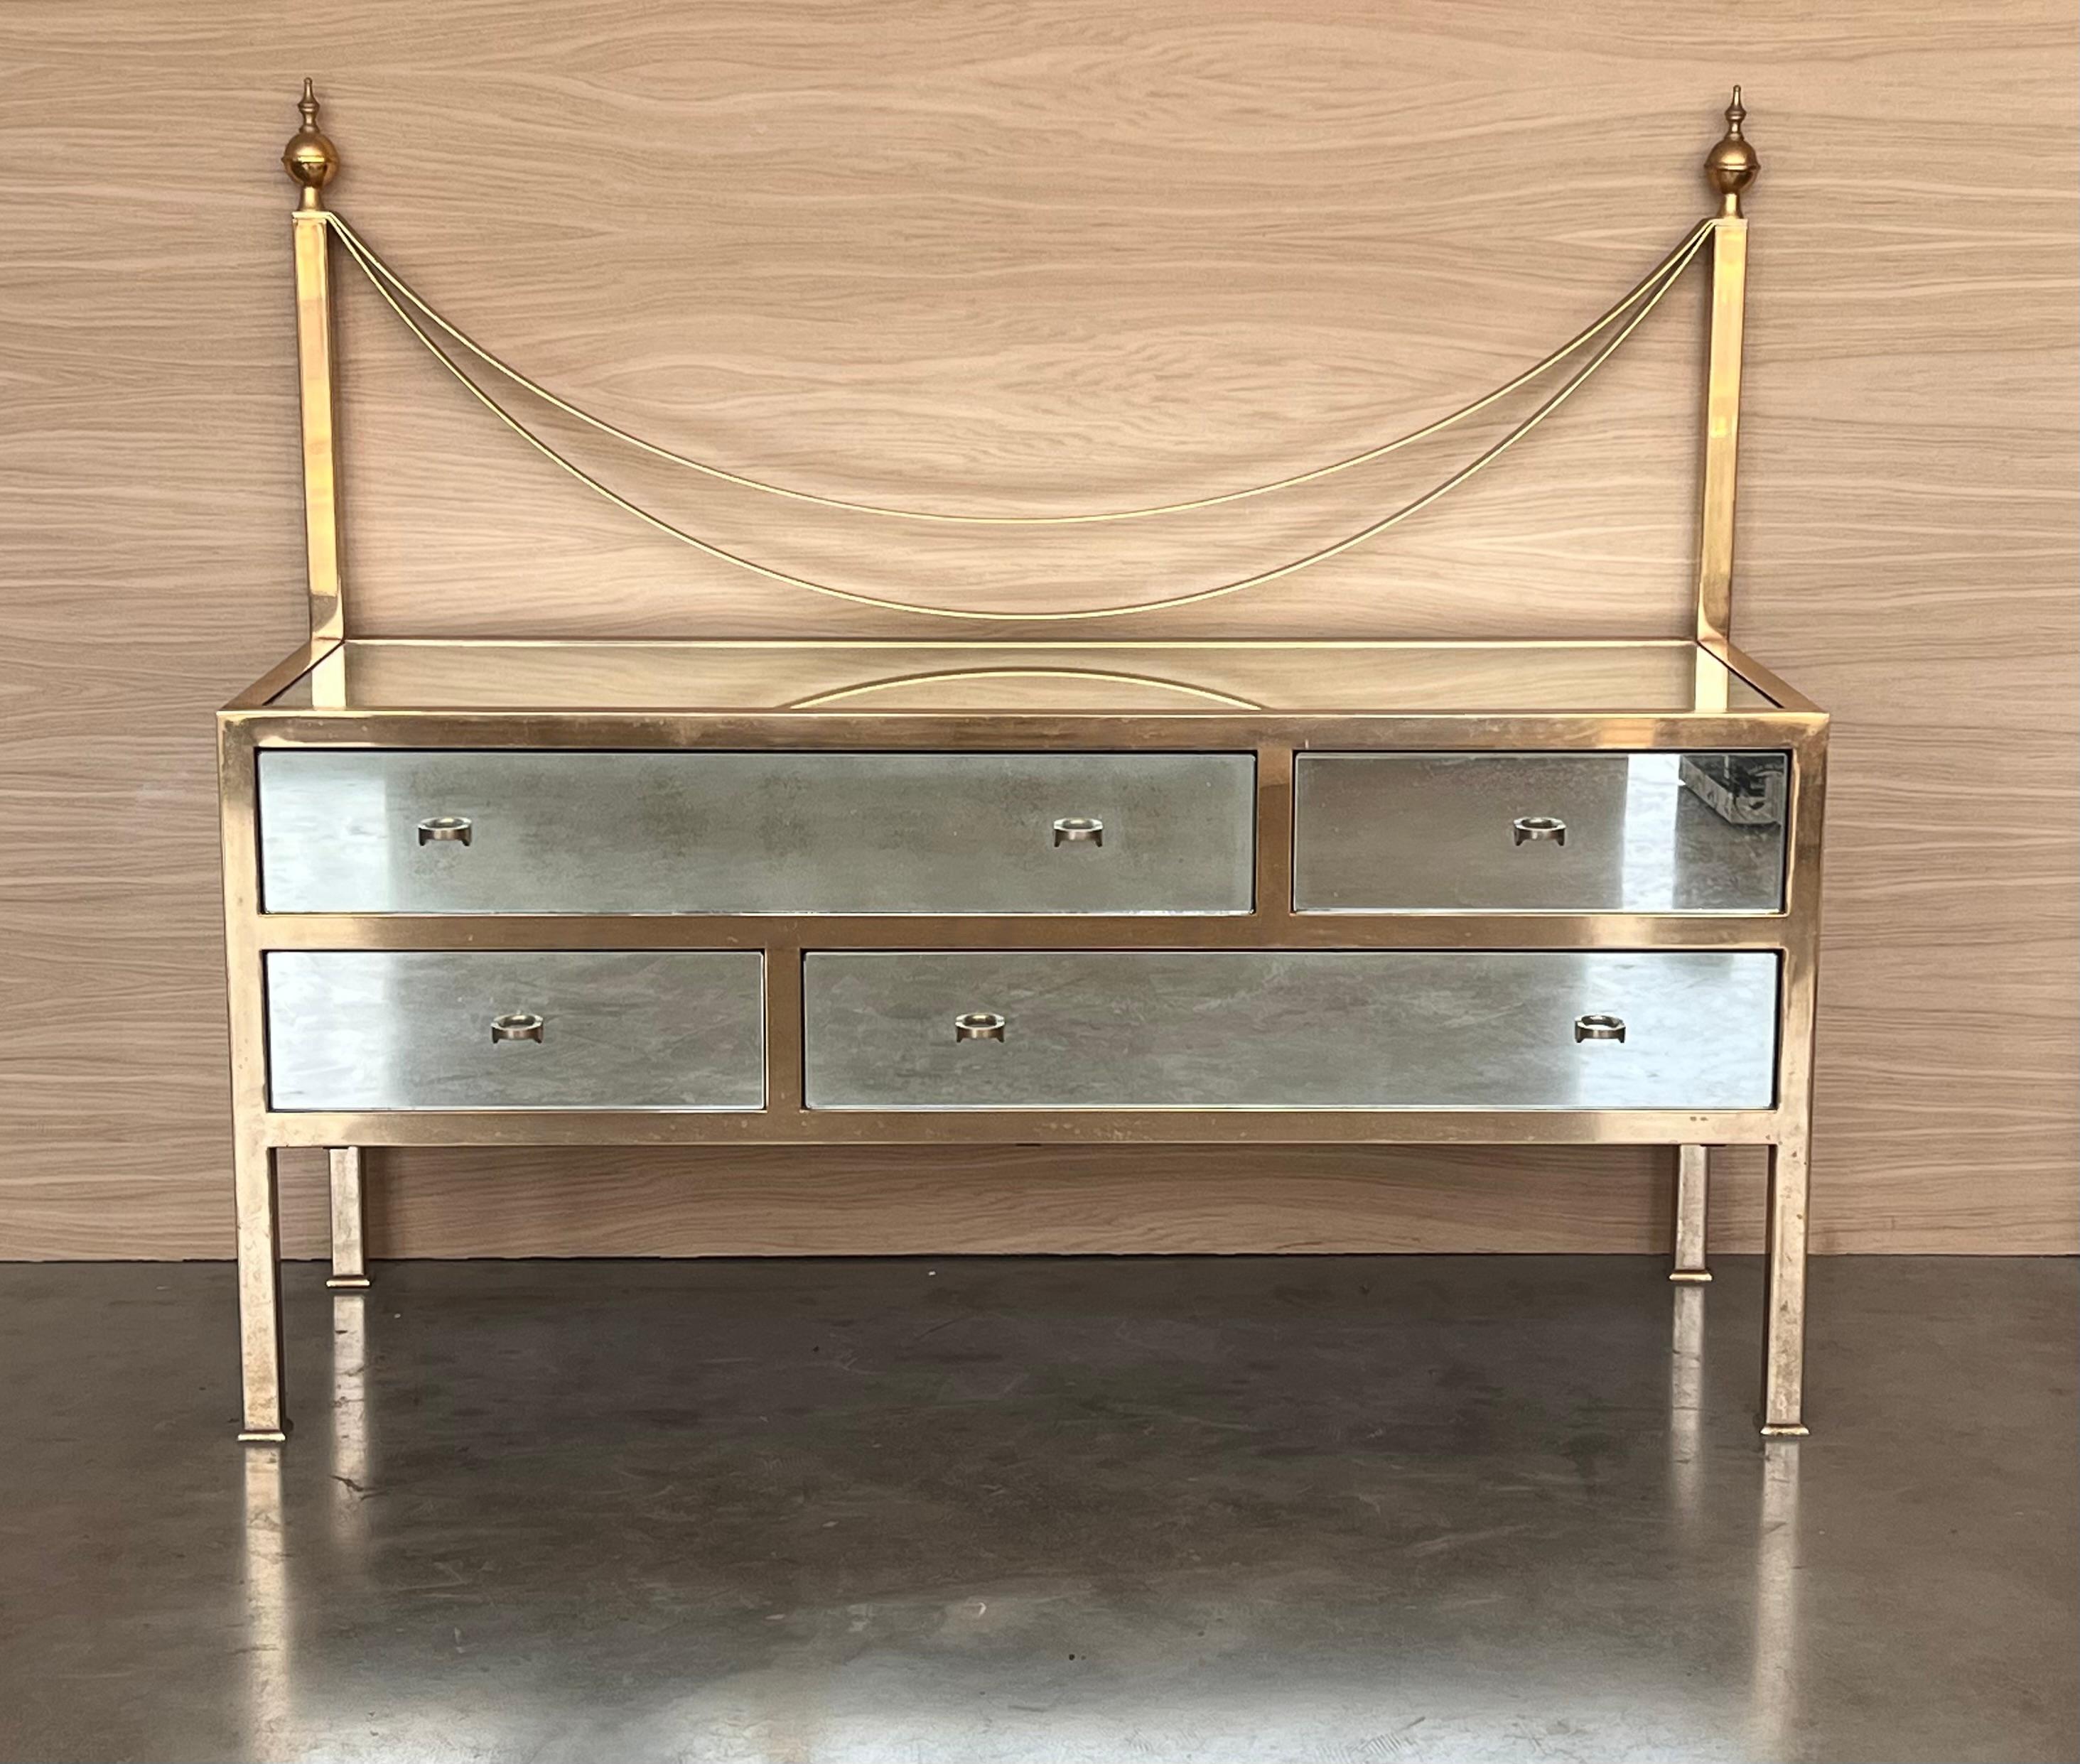 Midcentury Italian chest of drawers with crest.
Beautiful chest with four mirrored drawers.

Height to the glass top :24.01 in.